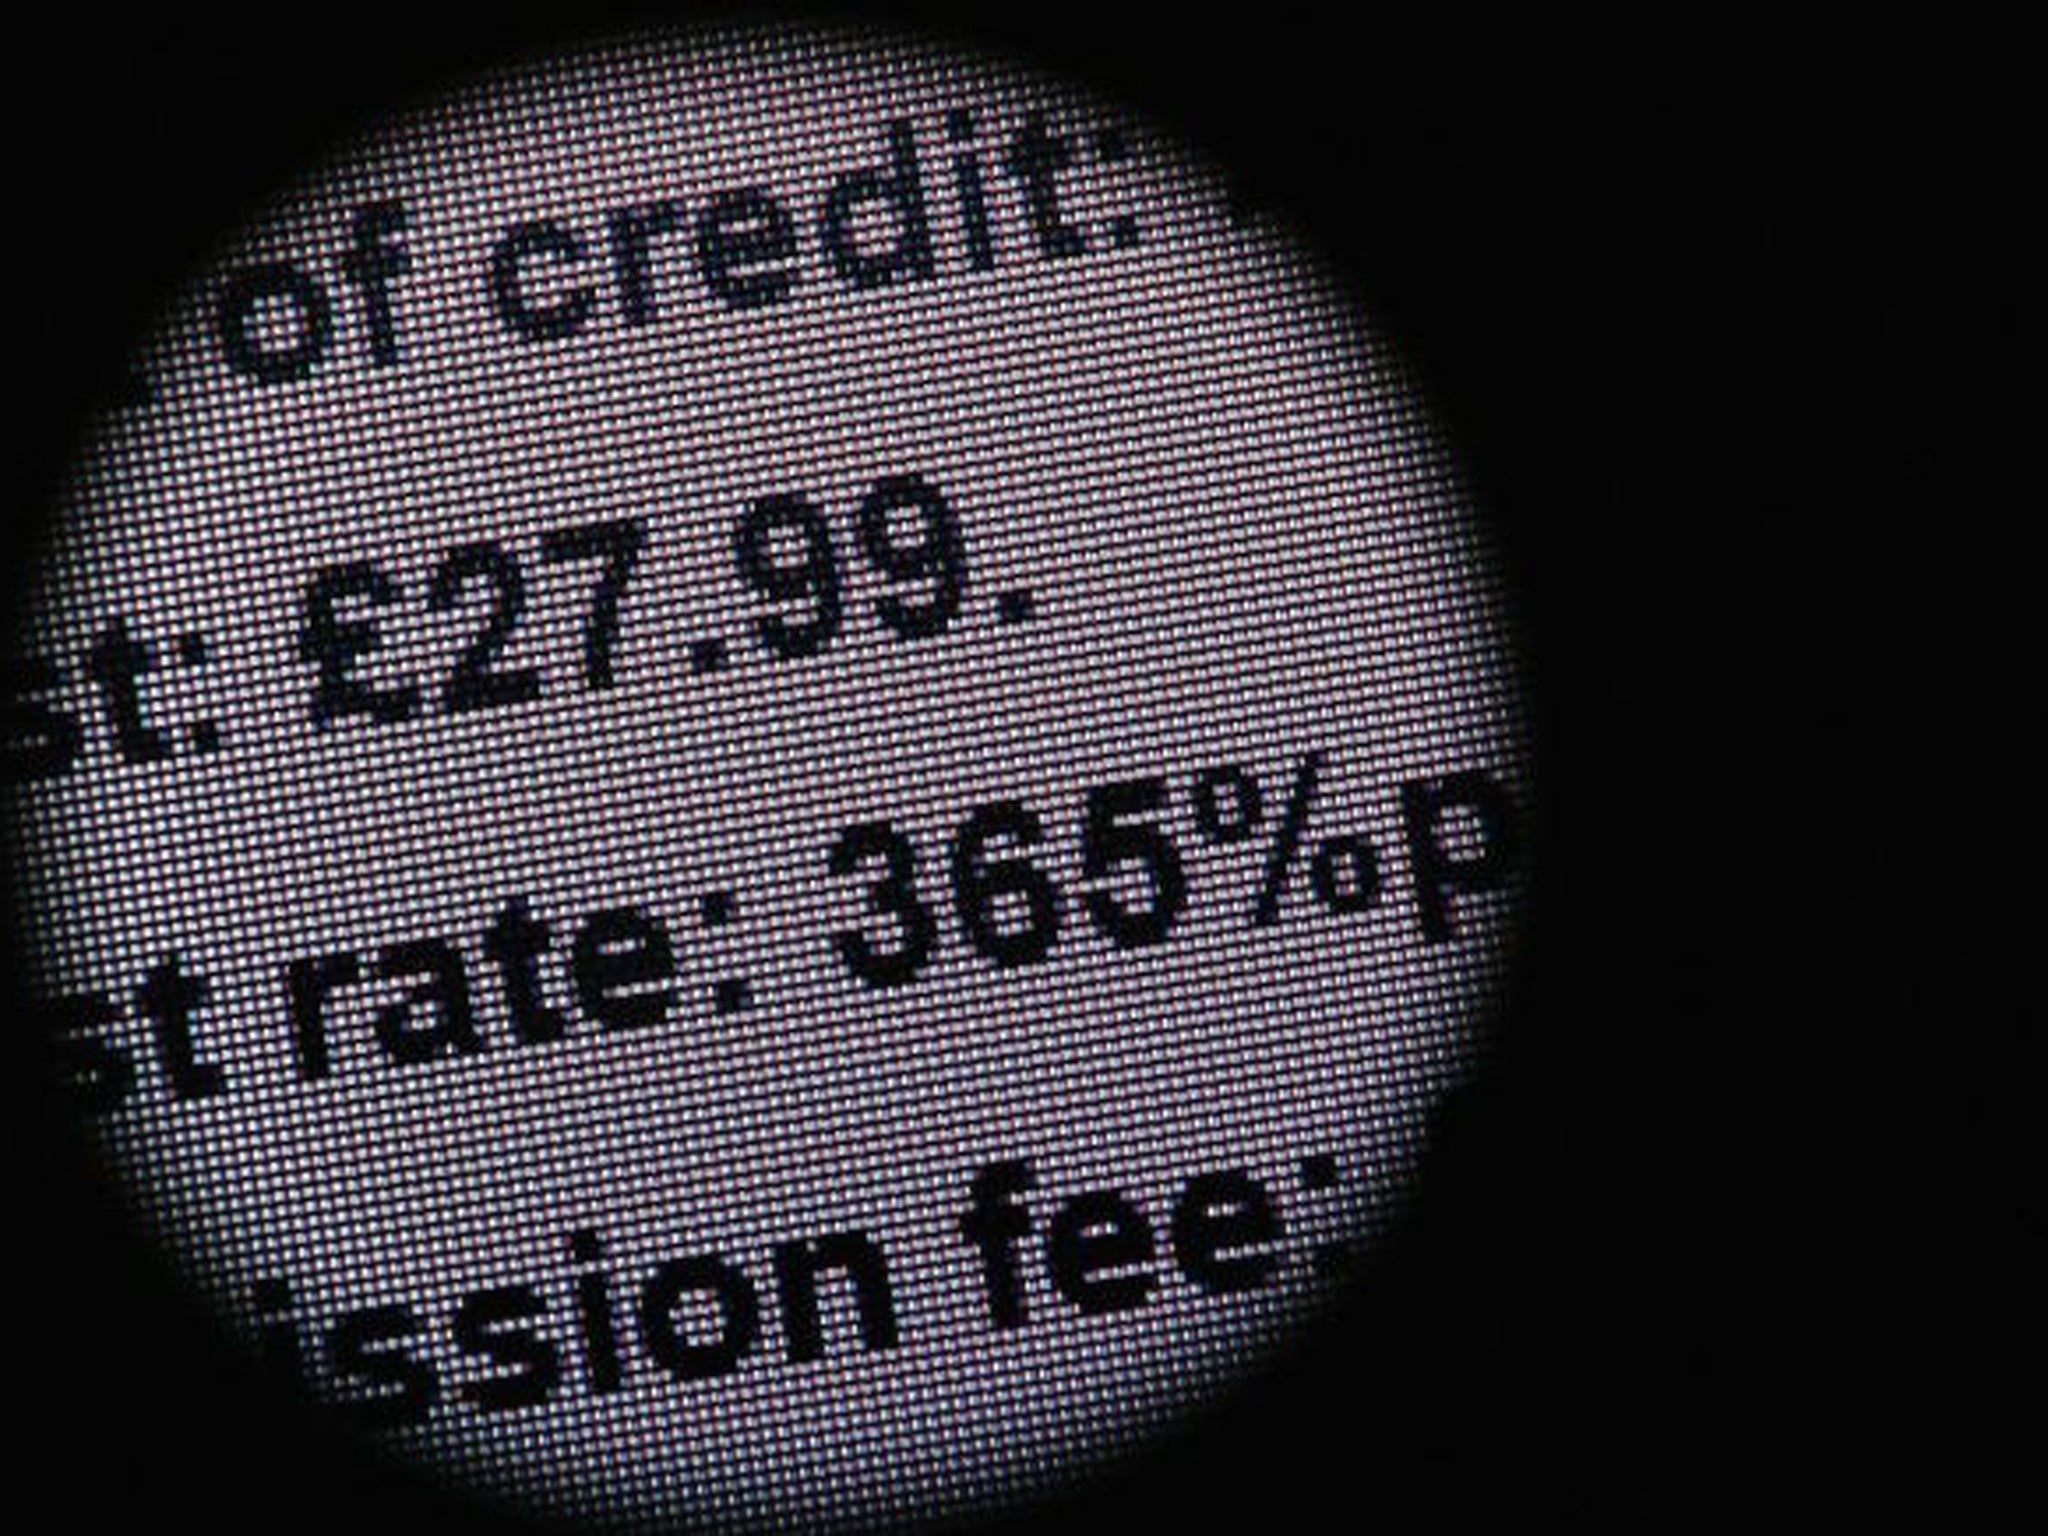 Savage circle: For all the talk of economic recovery, household debt is still on the rise and it will take years for some borrowers to get out of the red. Against this backdrop, the payday lender Wonga announced a massive rise in profits